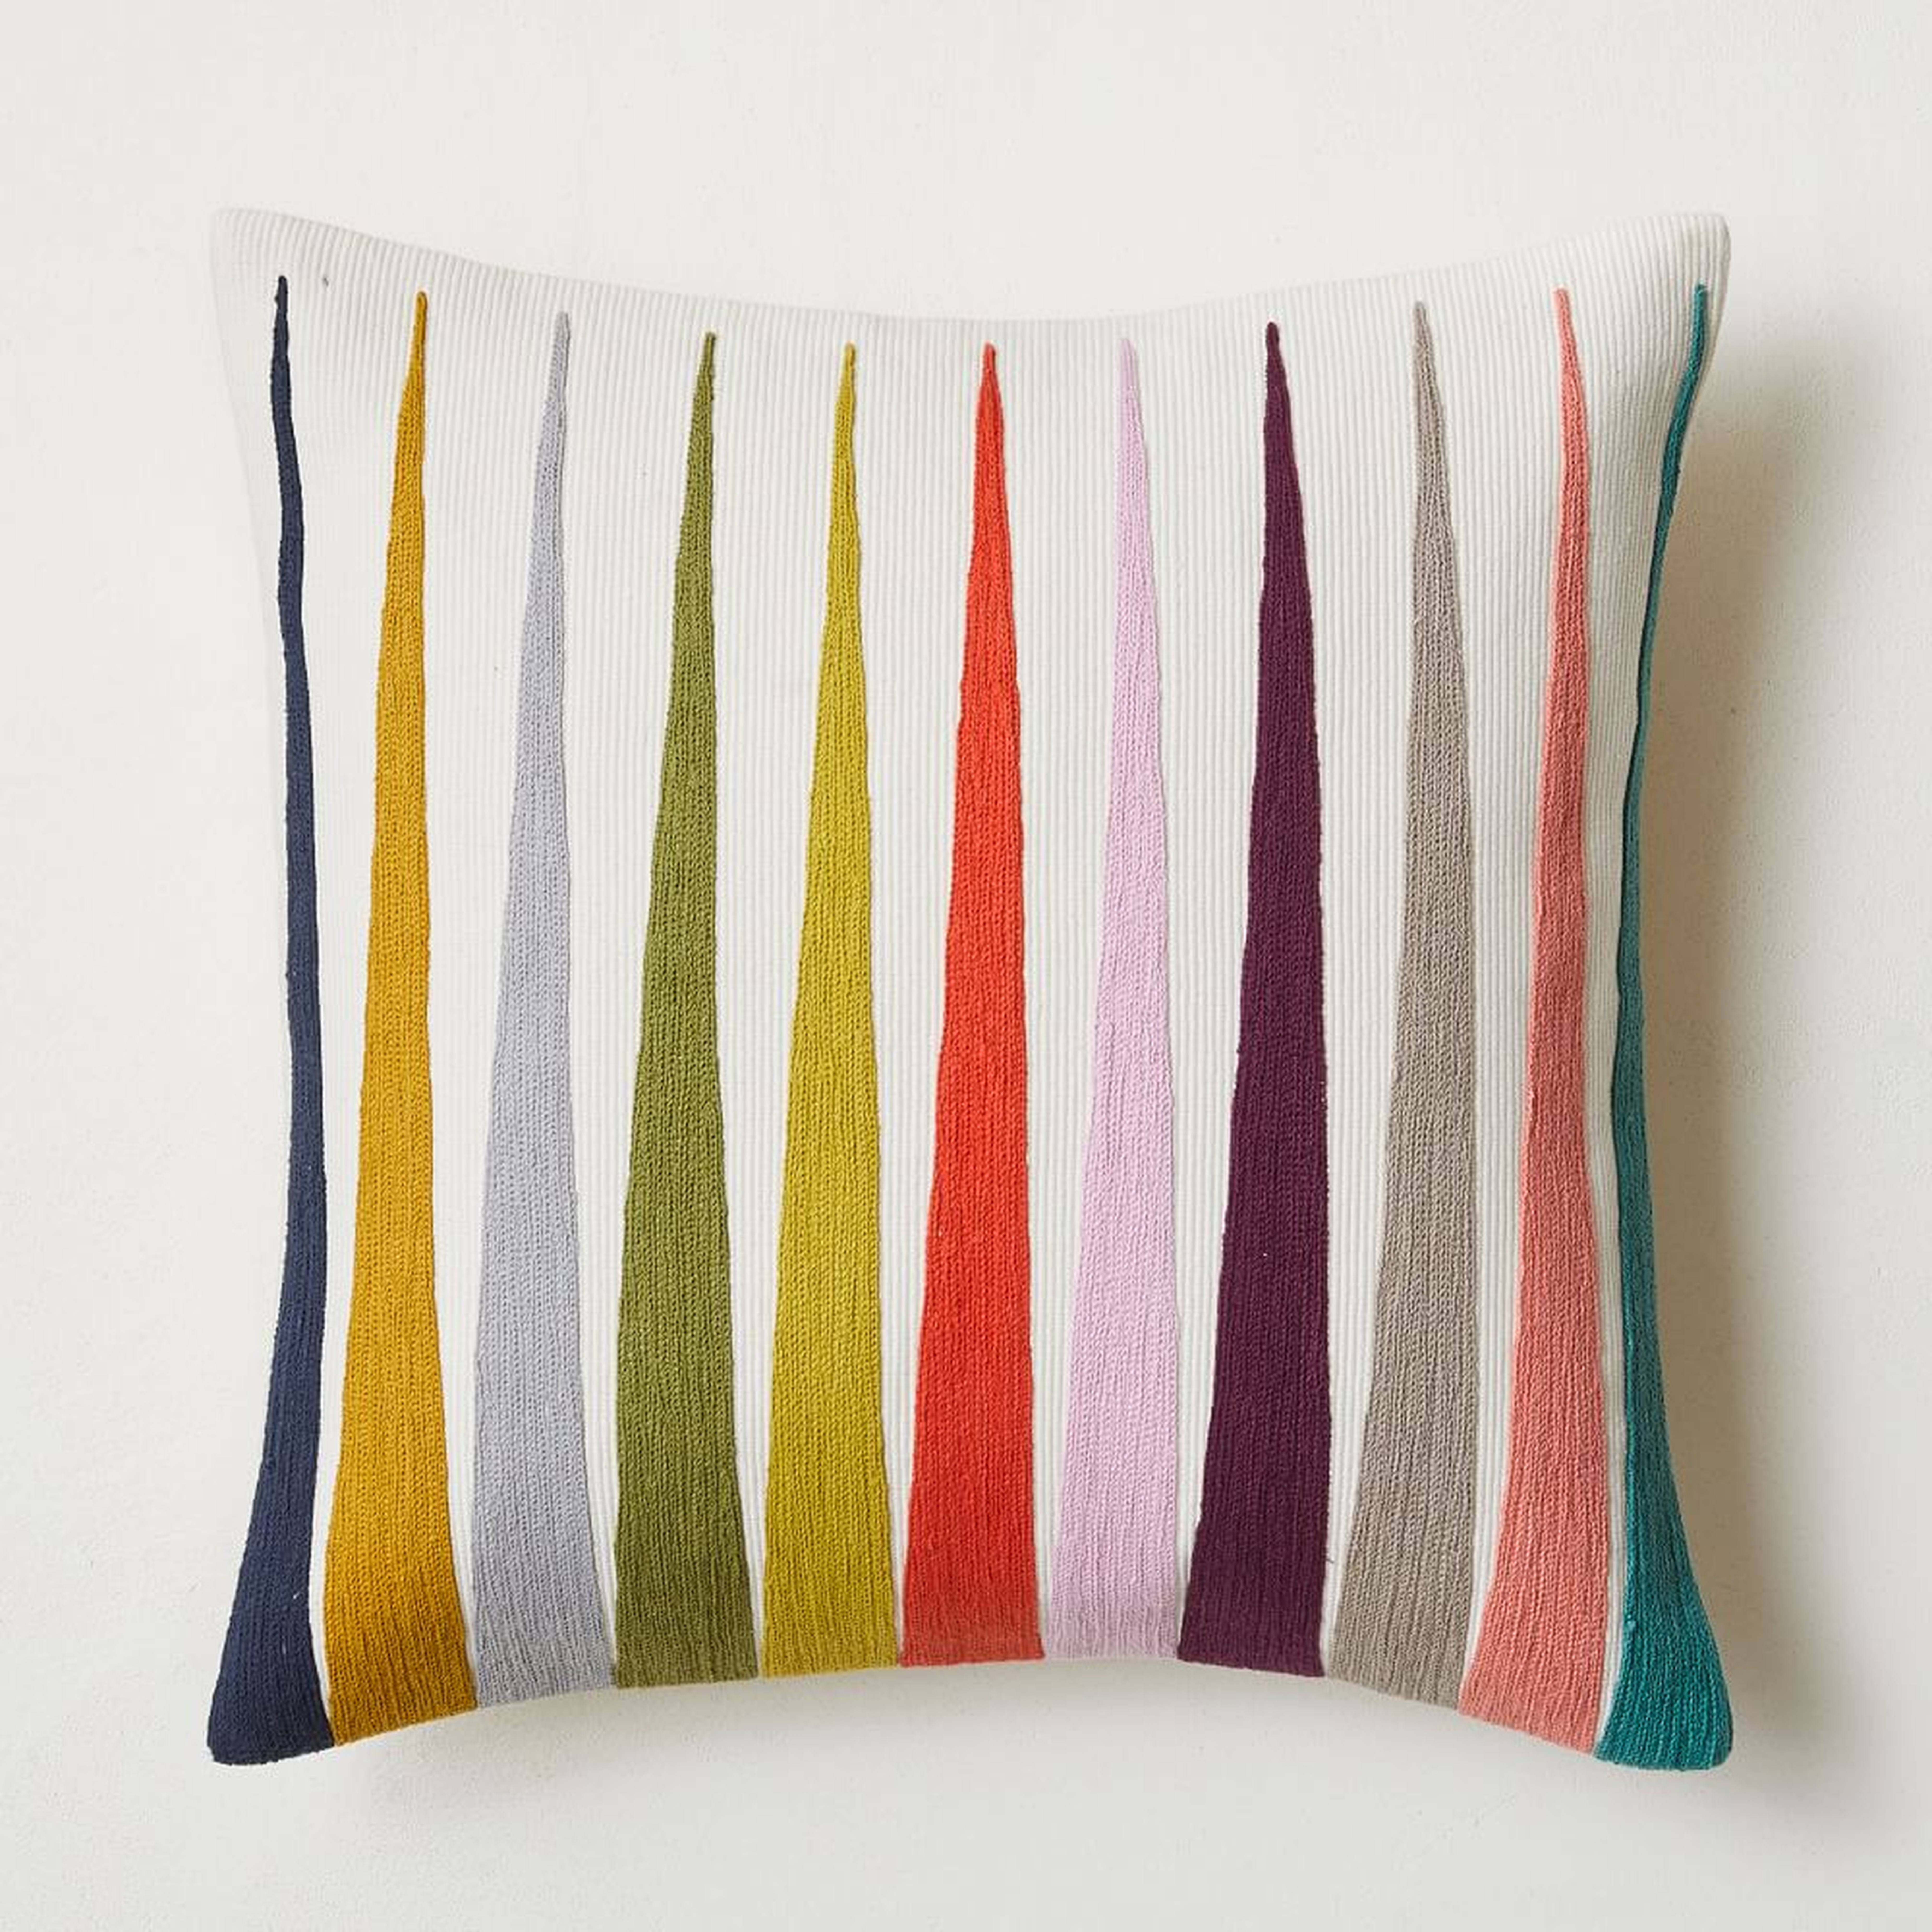 Margo Selby Spliced Lines Pillow Cover, 20"x20", Multi - West Elm